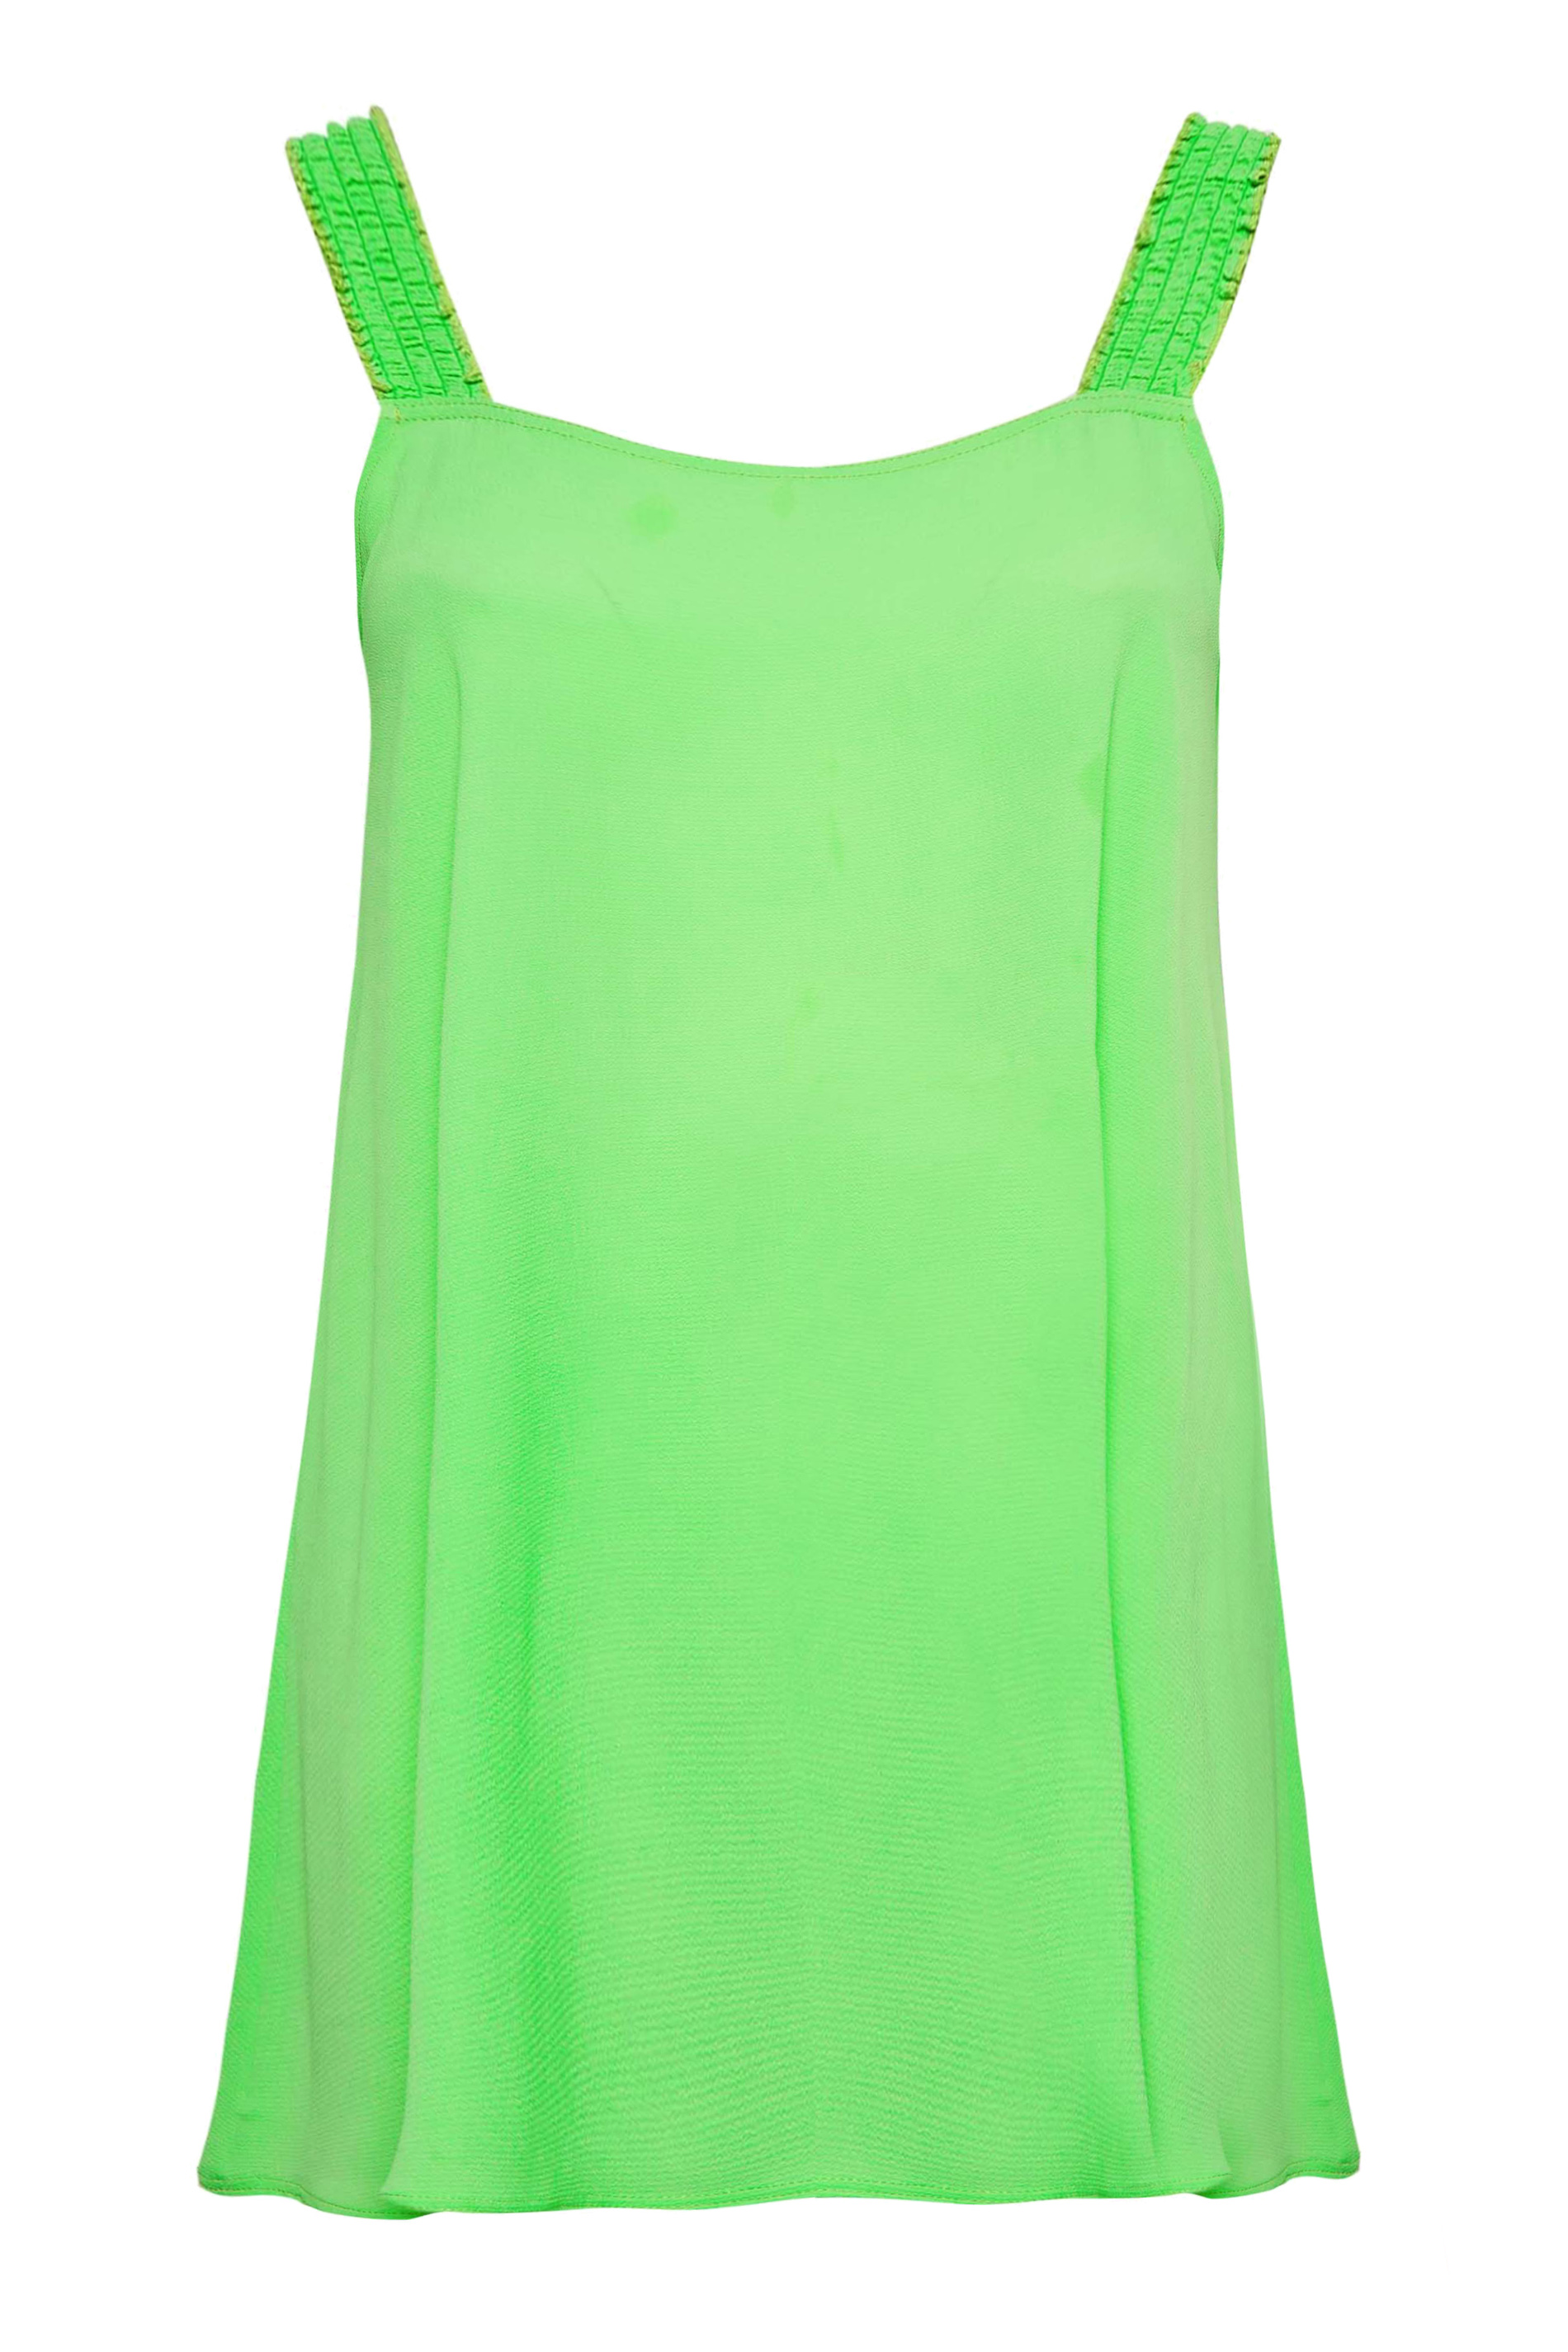 LIMITED COLLECTION Plus Size Bright Green Shirred Strap Cami Vest Top ...